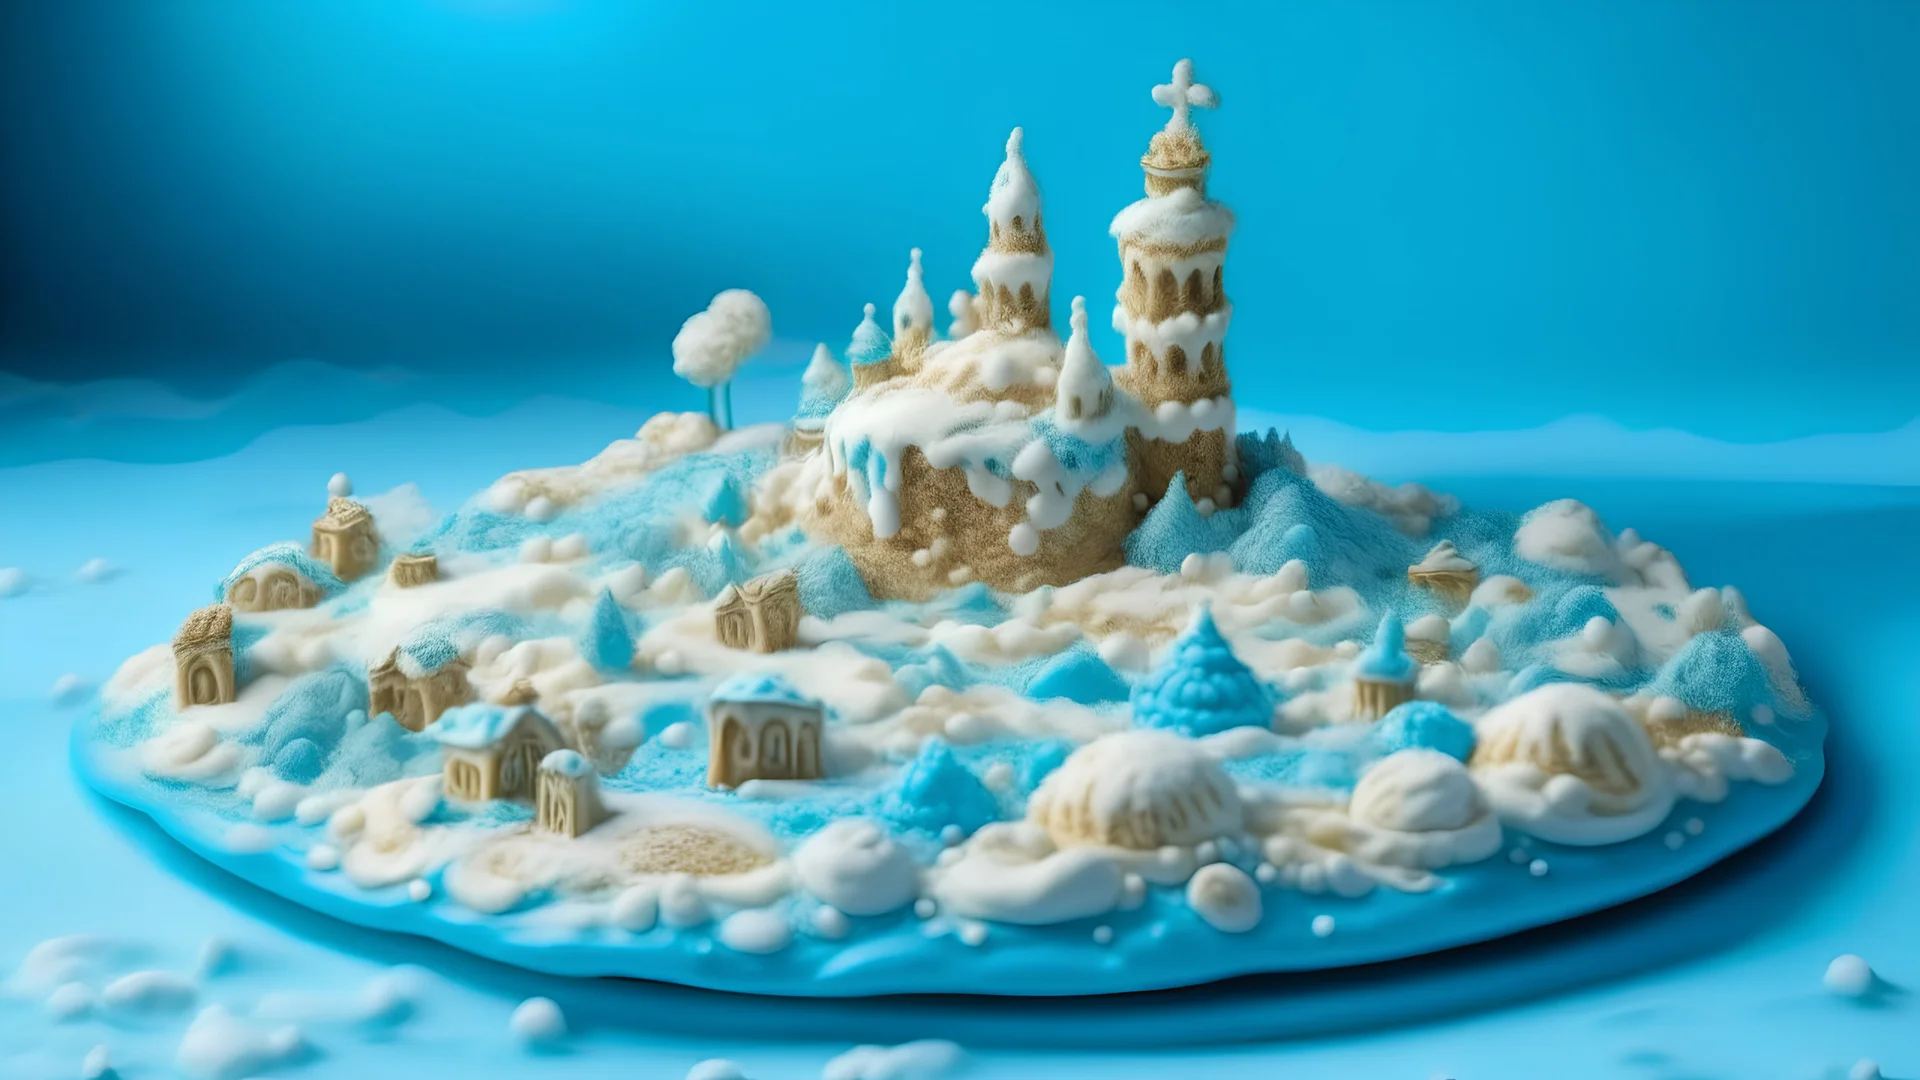 A light blue snowy wonderland made out of ice cream painted by Vincent van Gogh